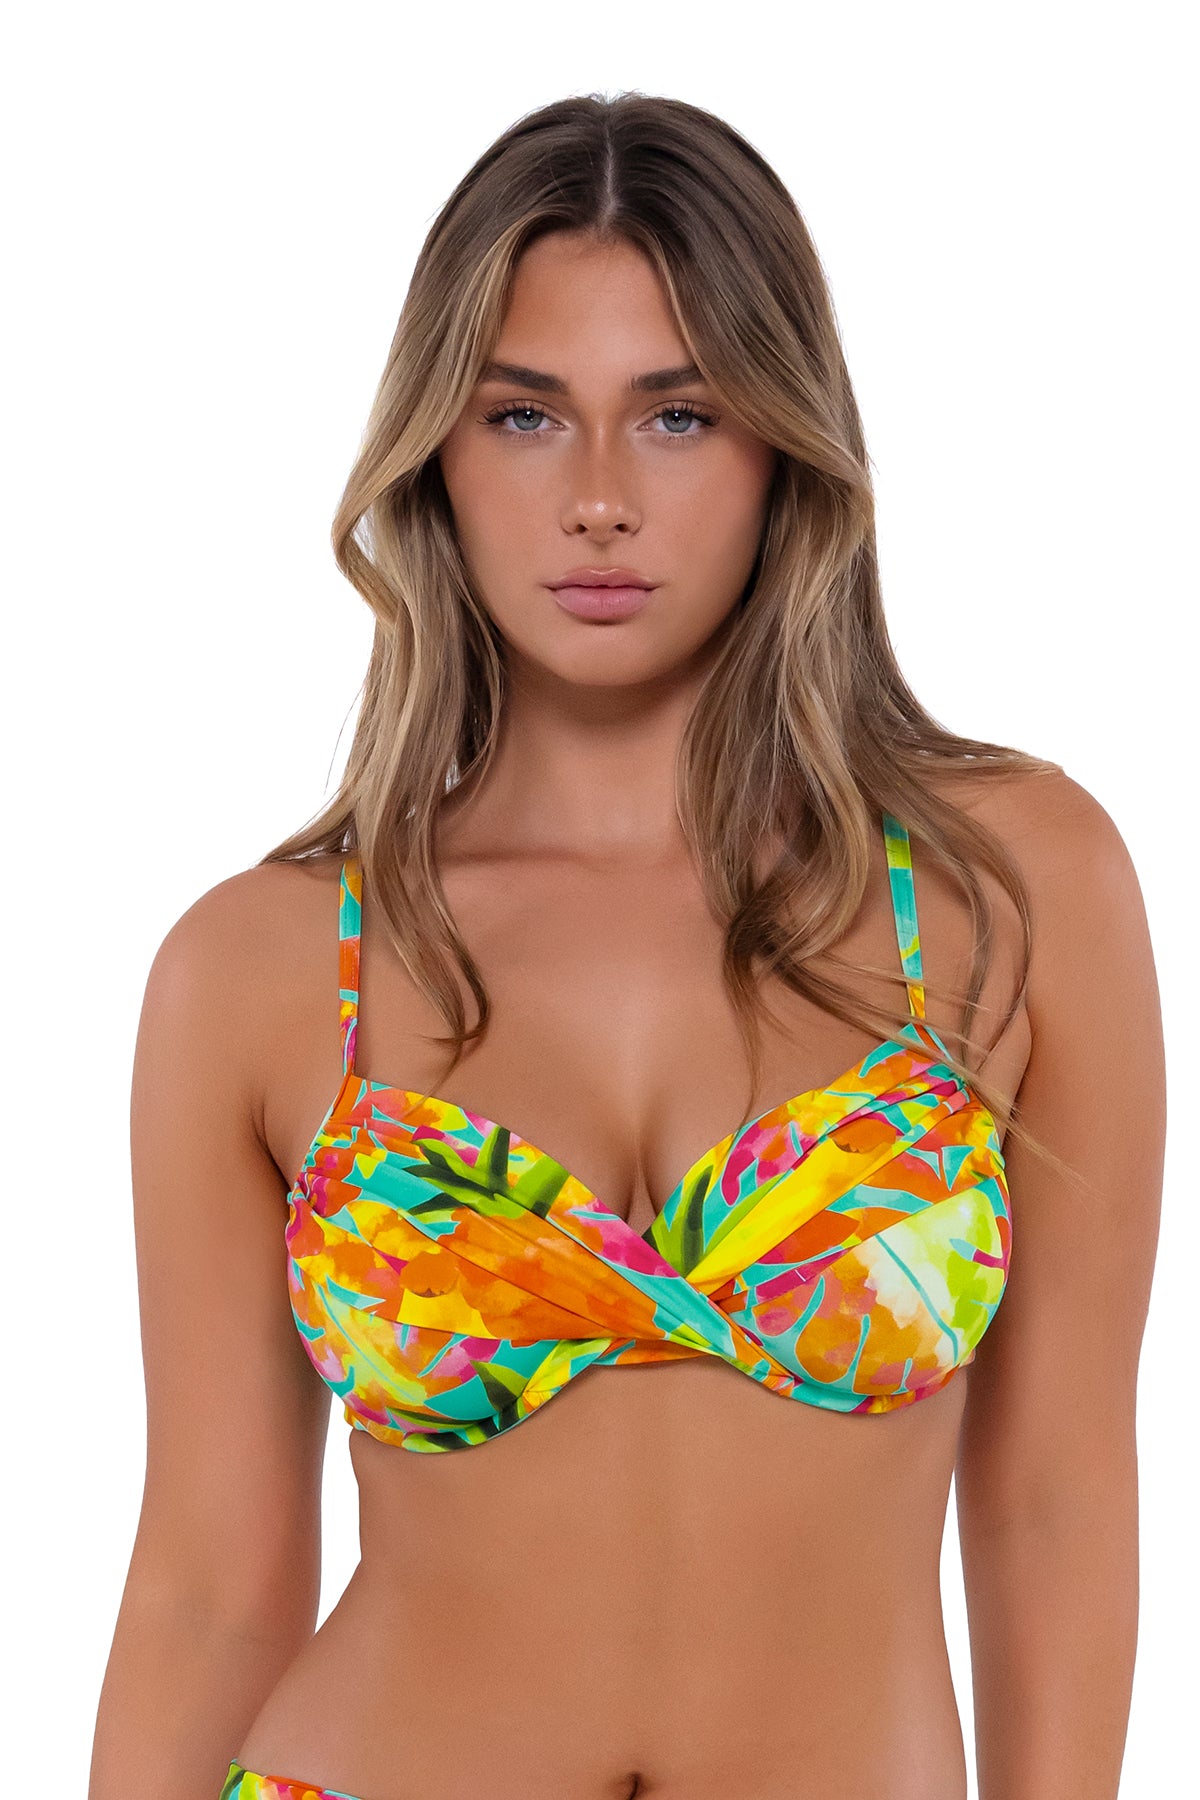 Front pose #1 of Taylor wearing Sunsets Lush Luau Crossroads Underwire Top